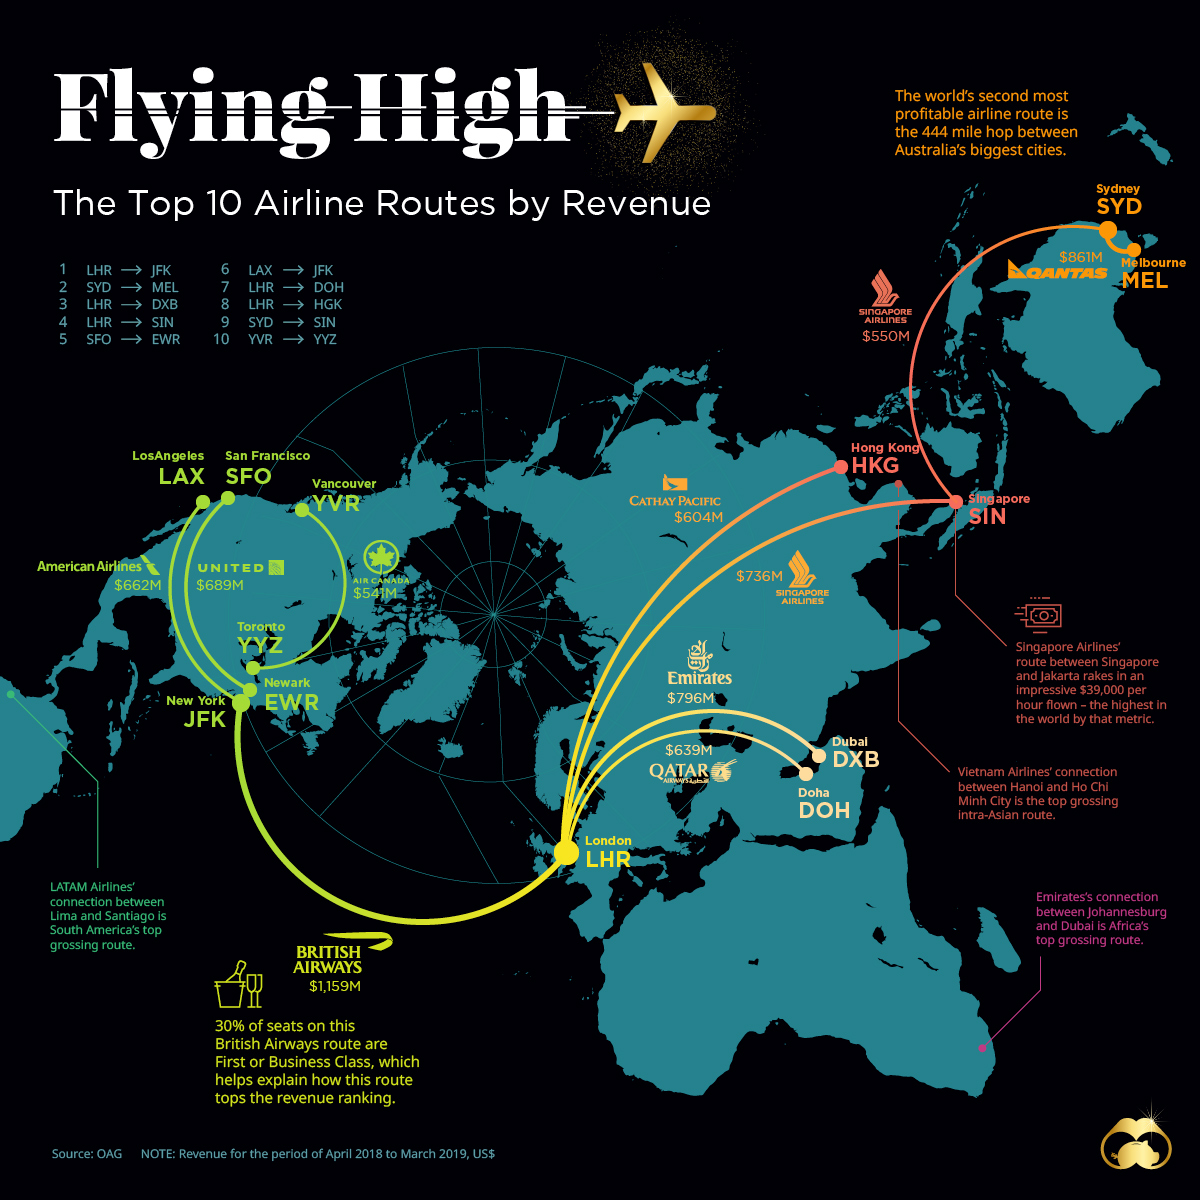 Top airline routes by revenue